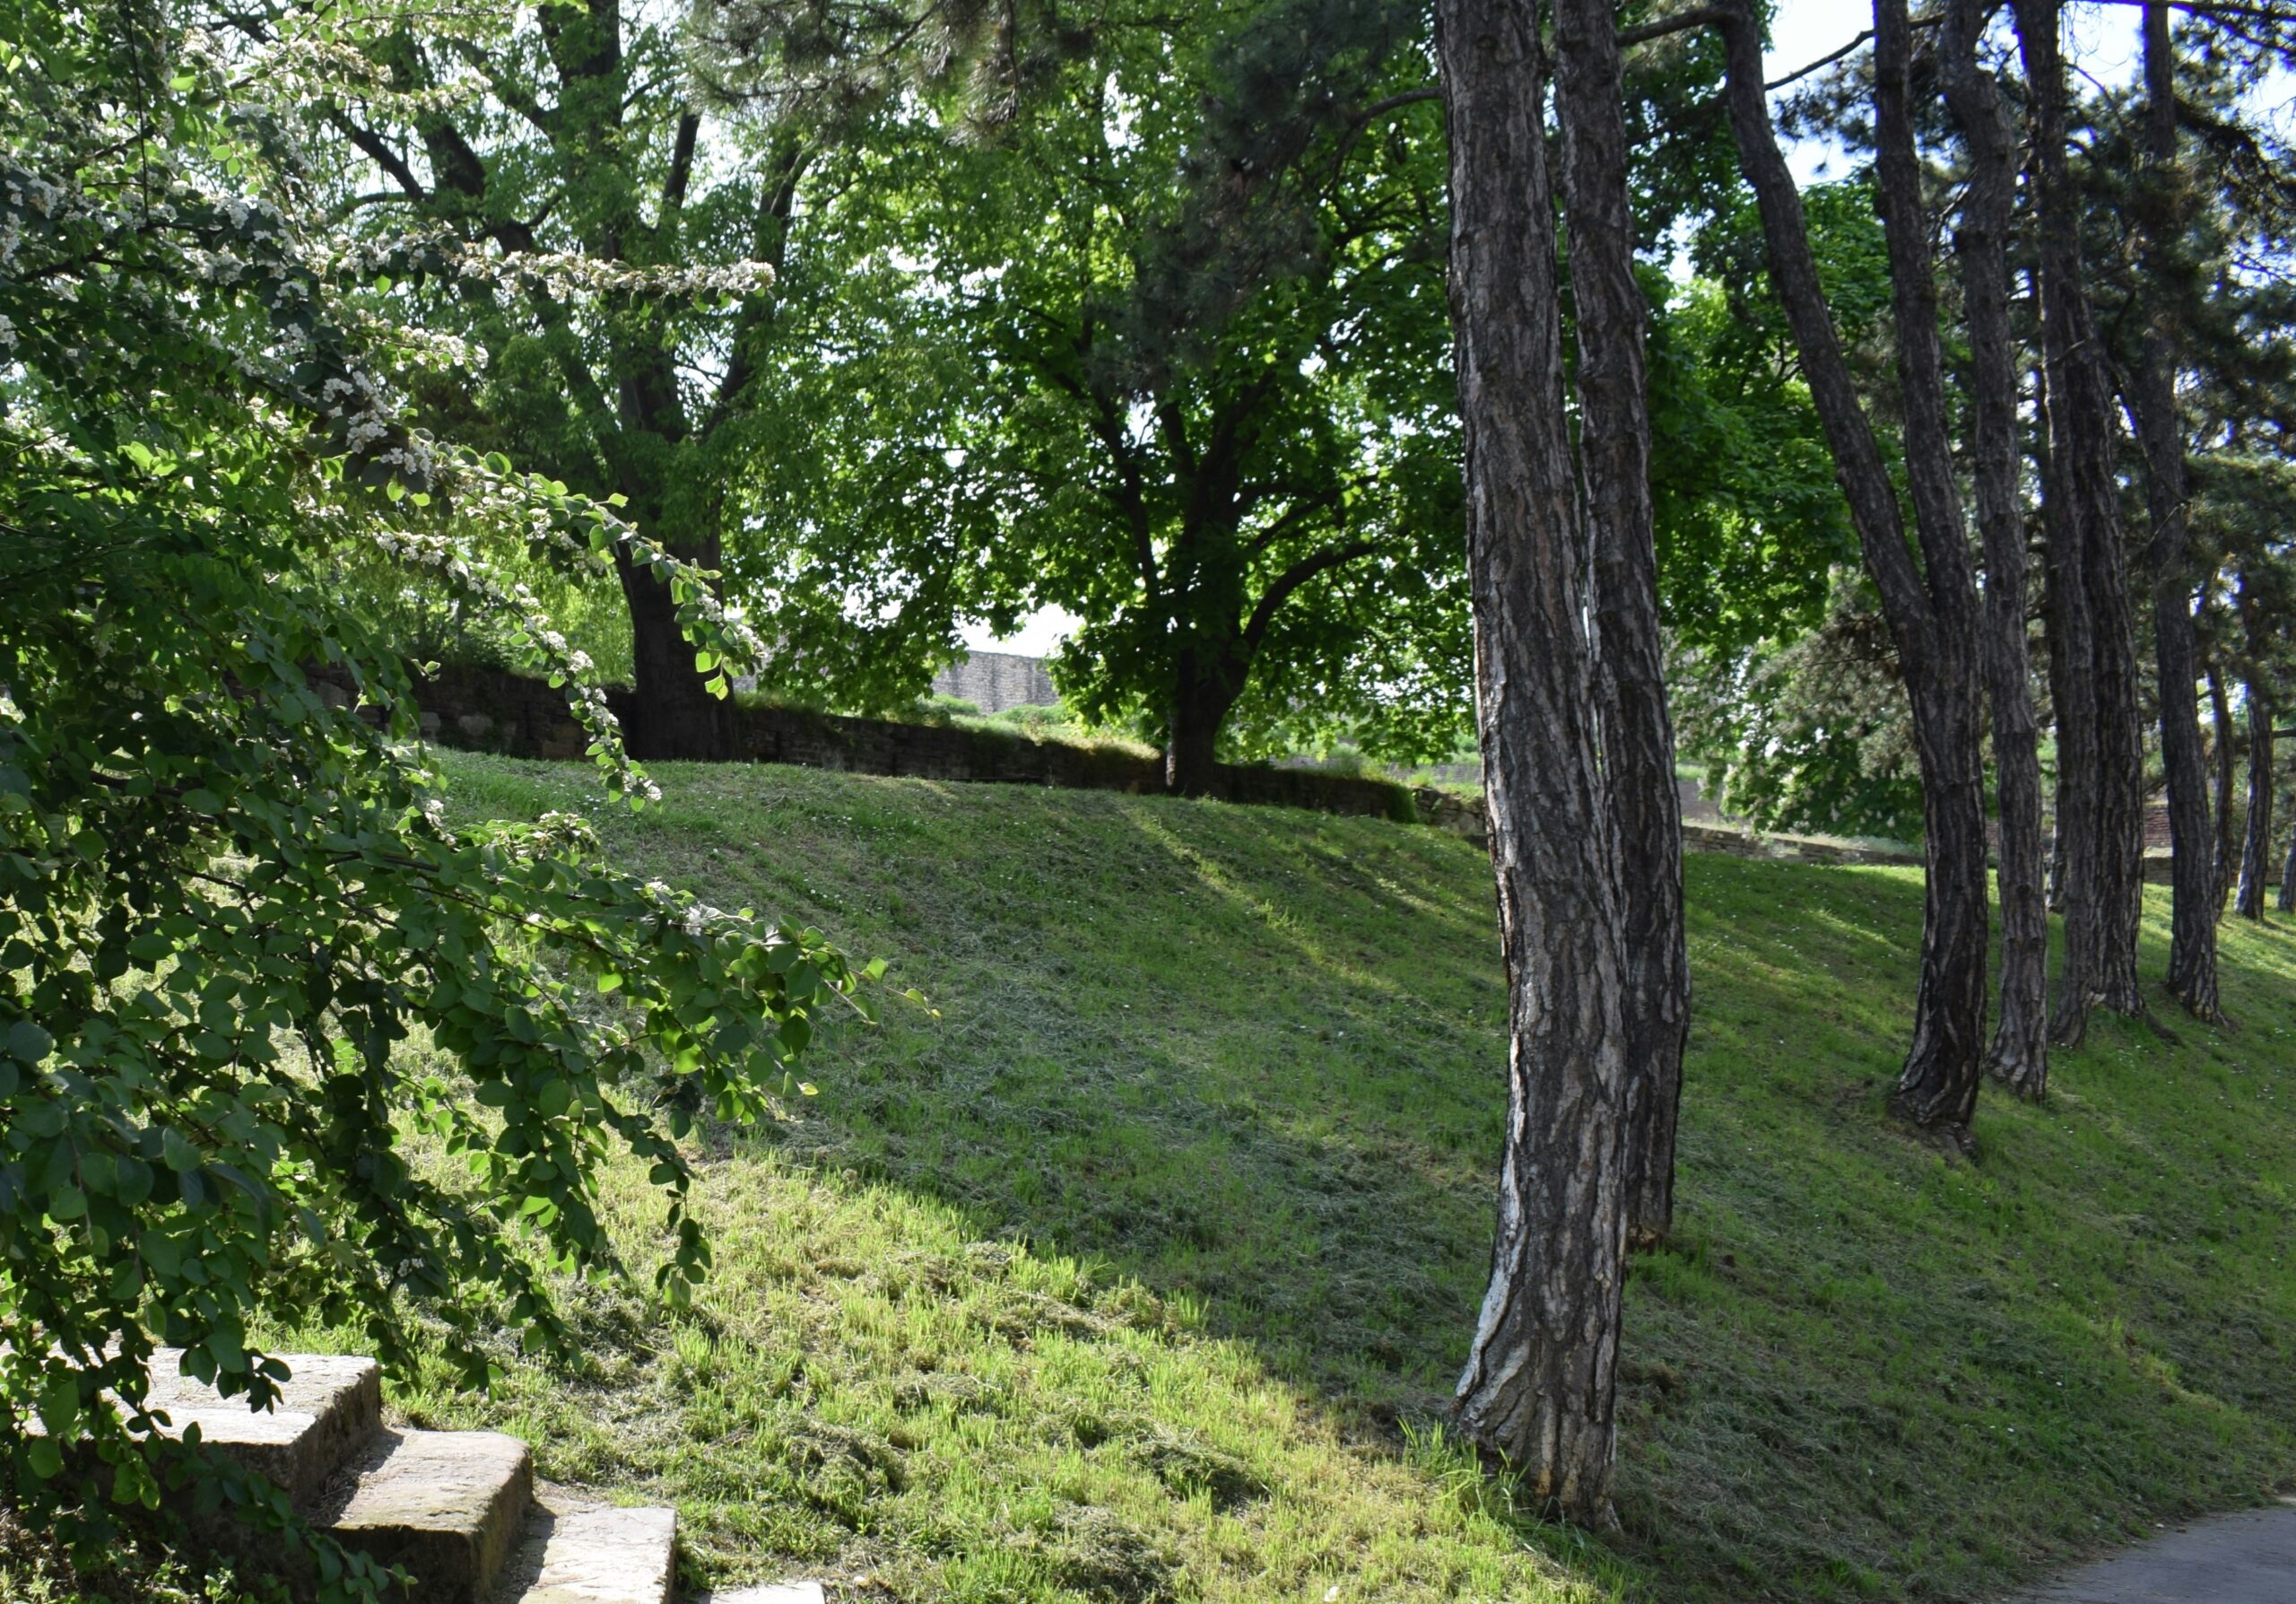 A serene park with a gently sloping grassy hill, tall trees, and stone steps, bathed in soft sunlight.